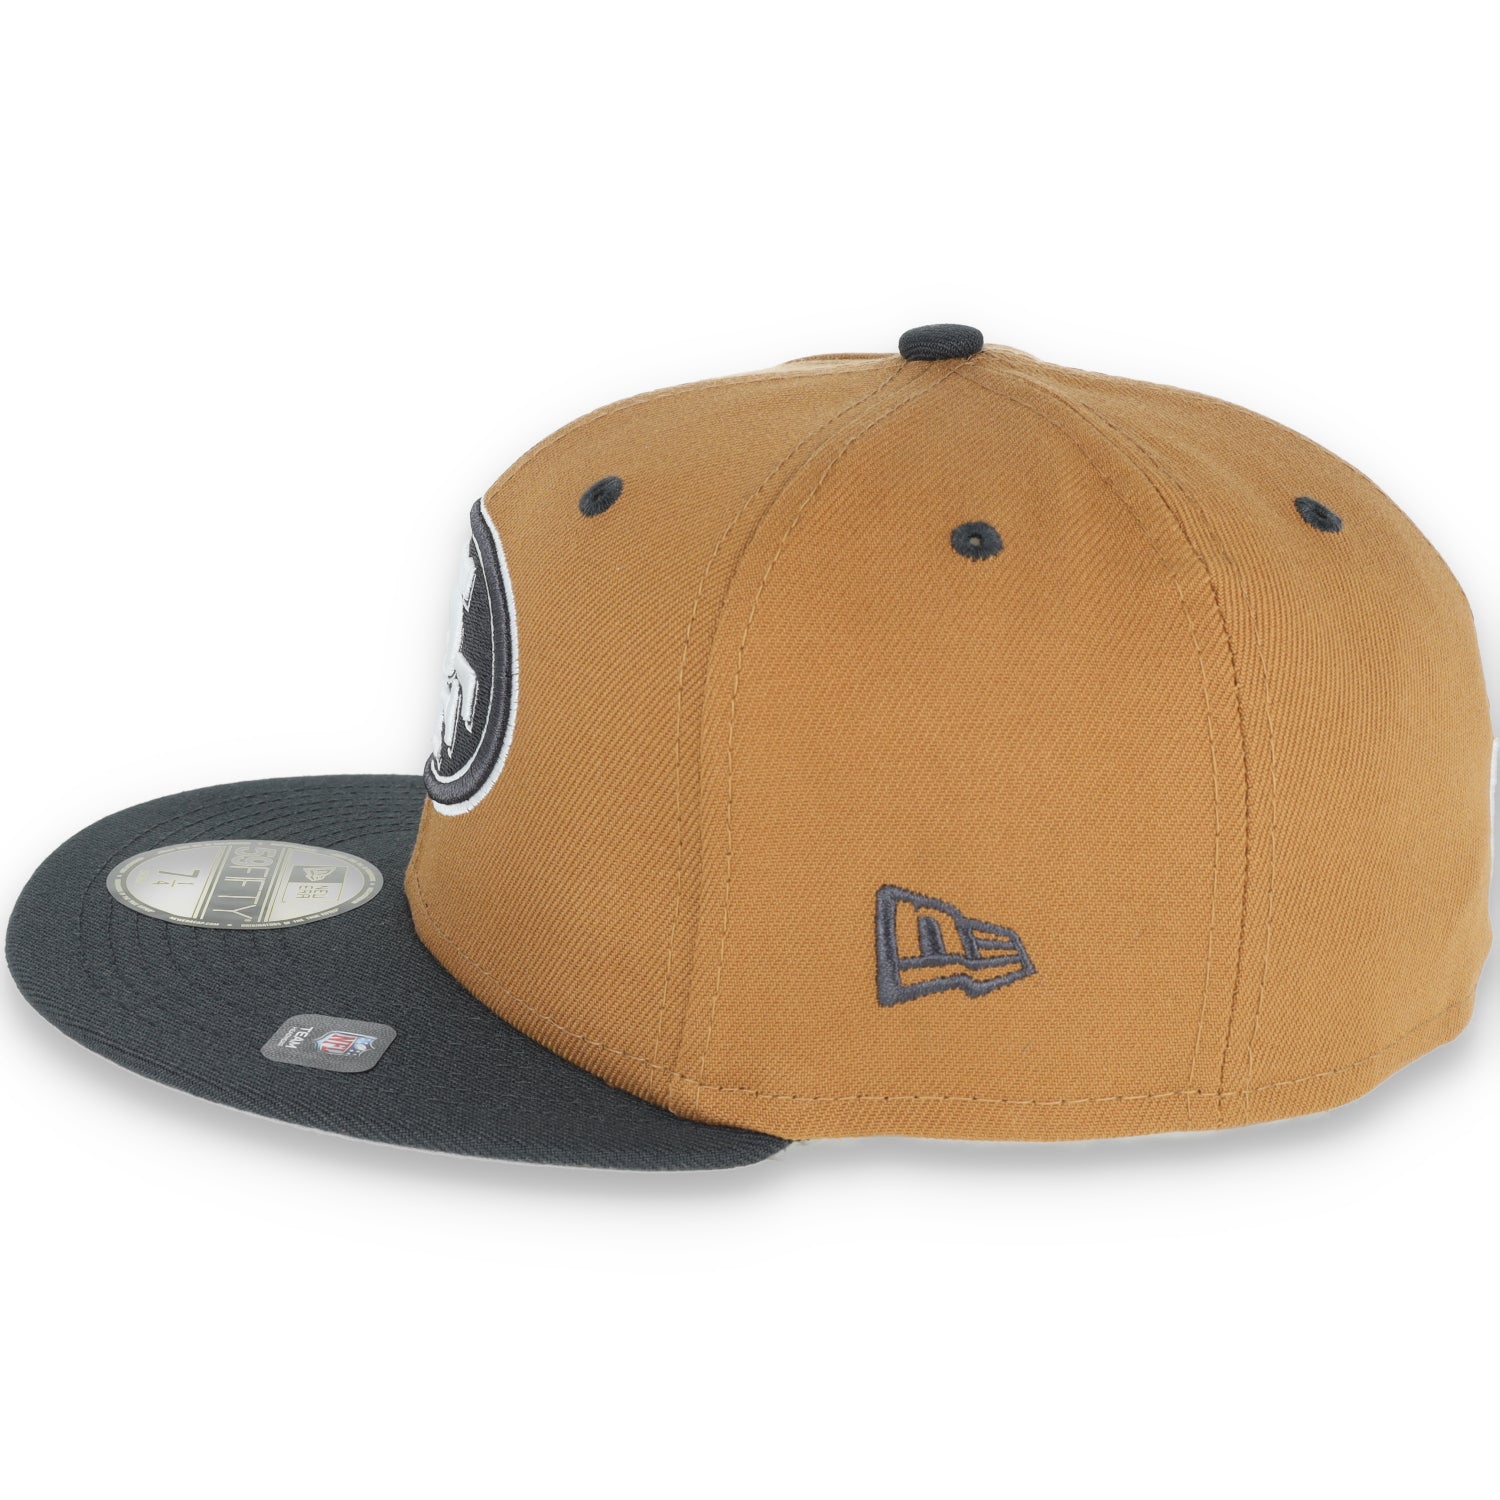 NEW ERA SAN FRANCISCO 49ERS 59FIFTY COLOR PACK FITTED -TAN/GREY